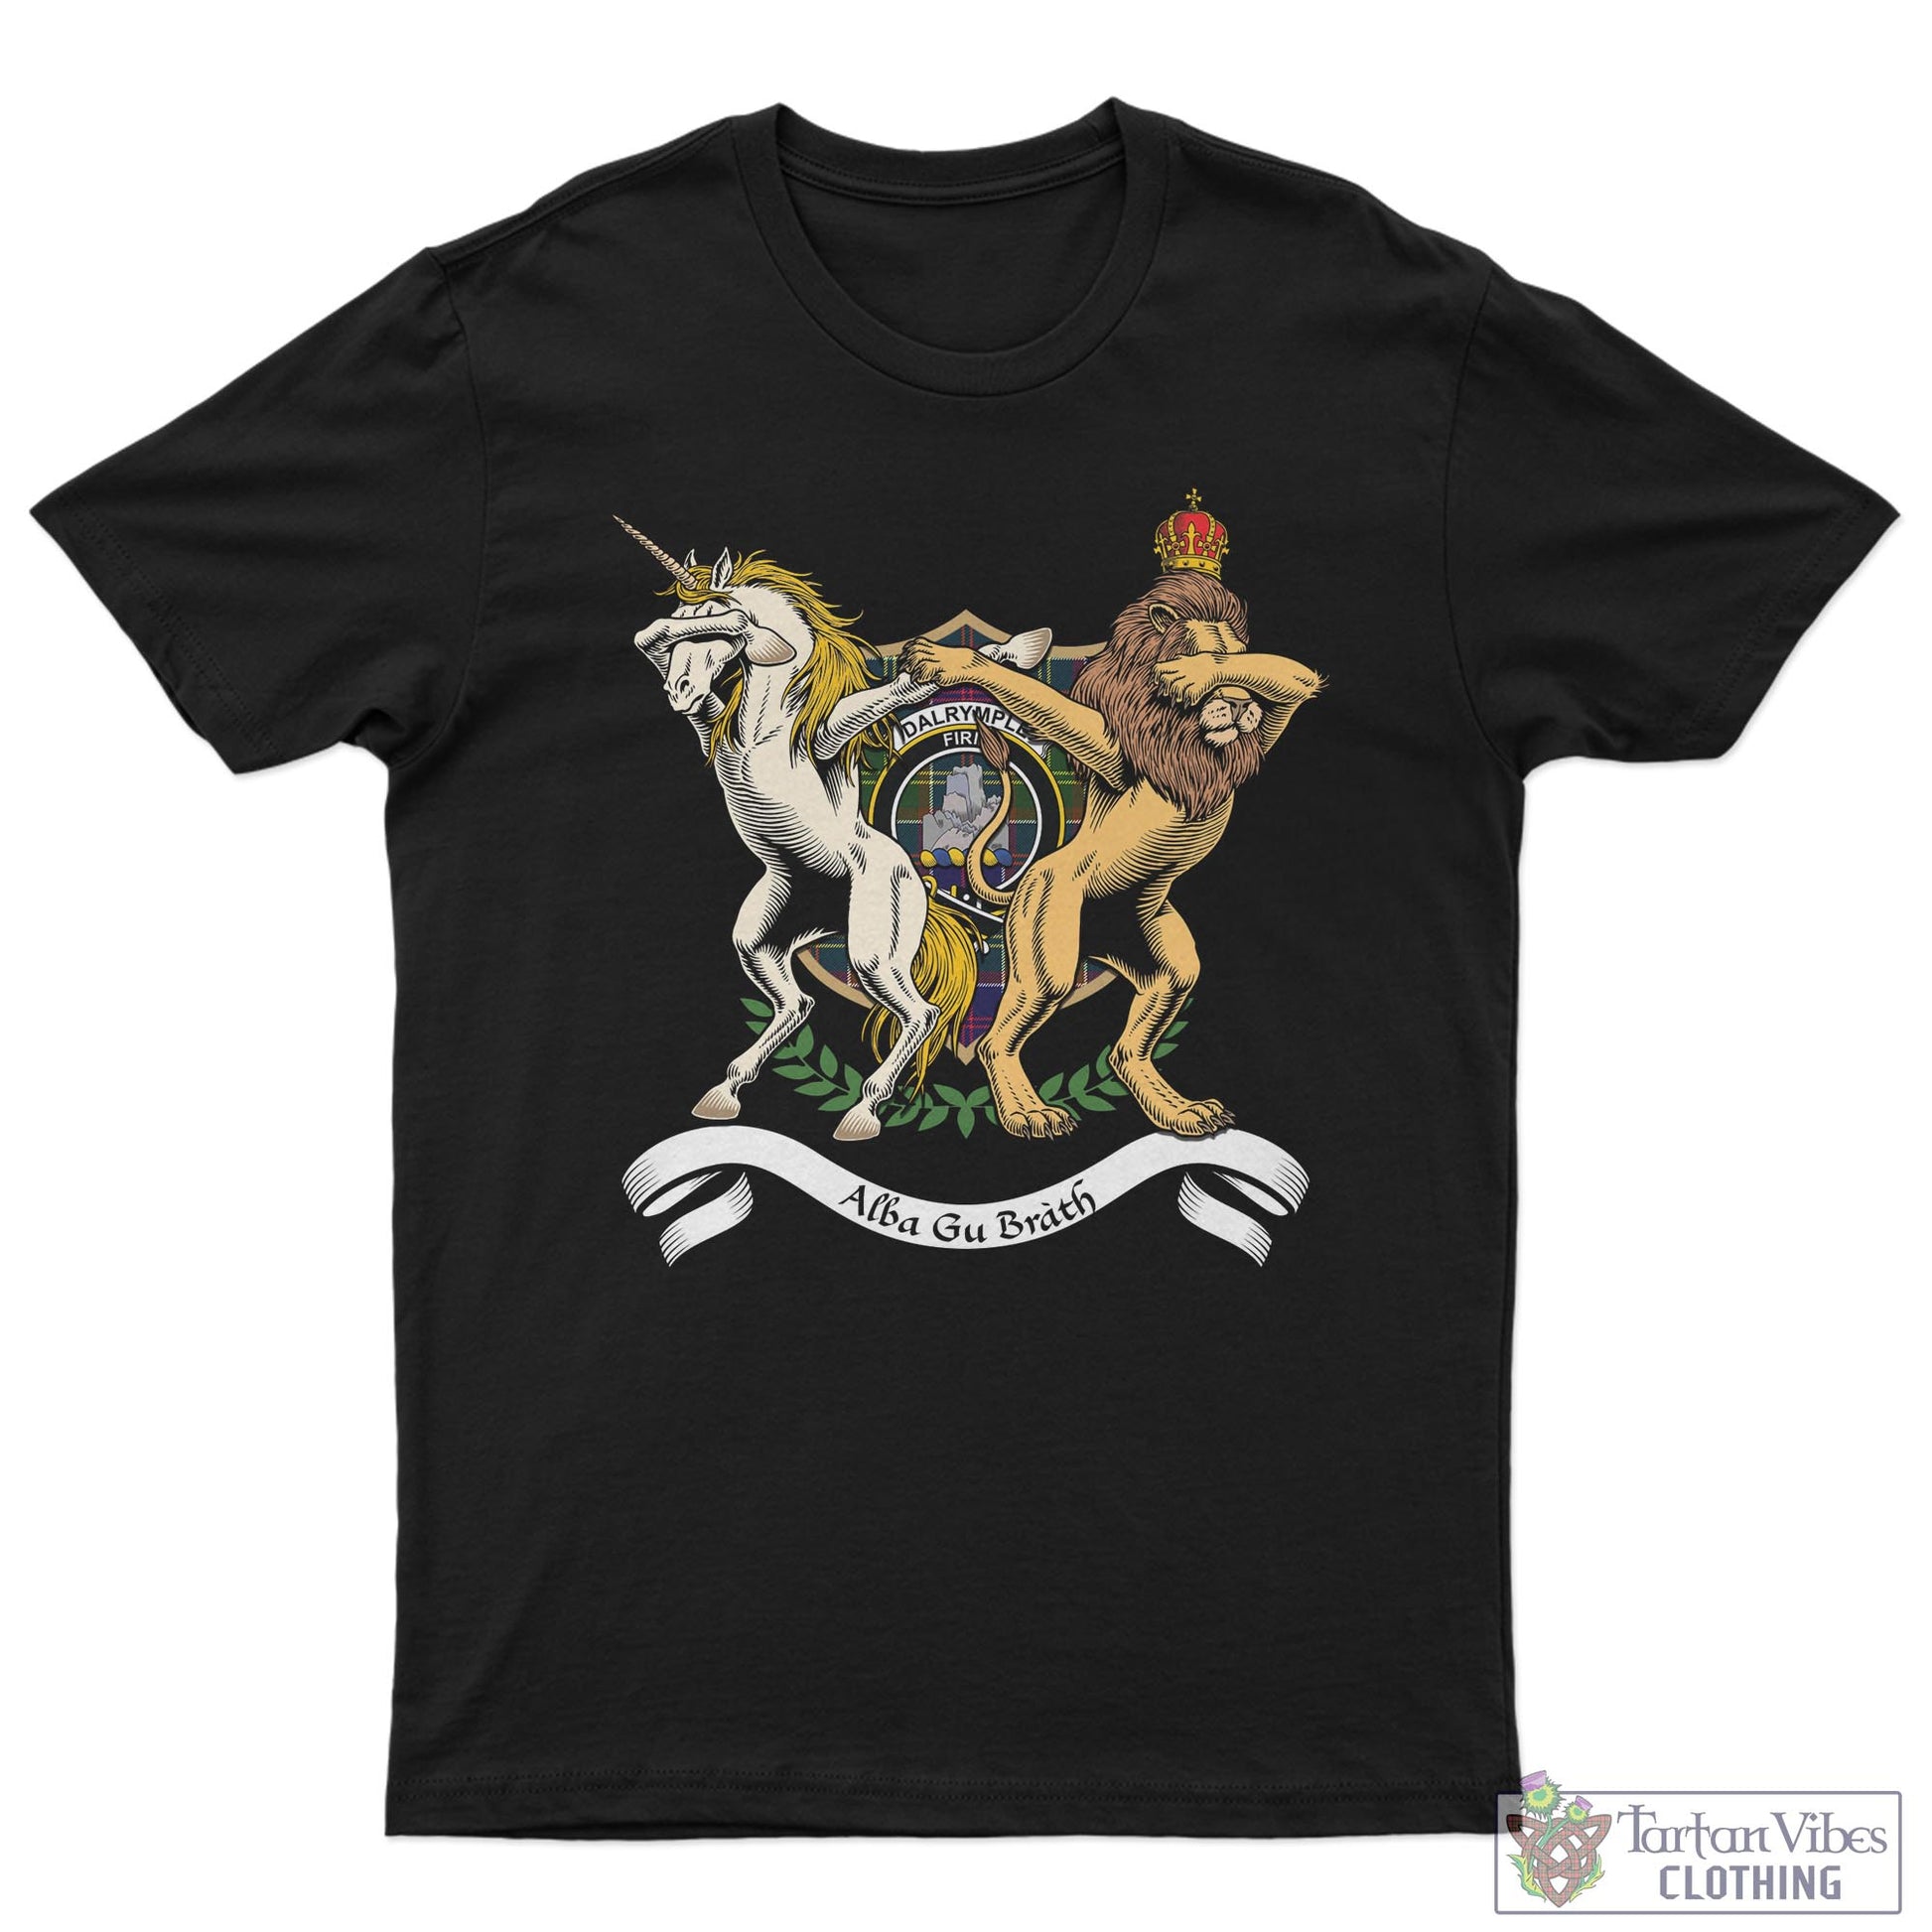 Tartan Vibes Clothing Dalrymple Family Crest Cotton Men's T-Shirt with Scotland Royal Coat Of Arm Funny Style